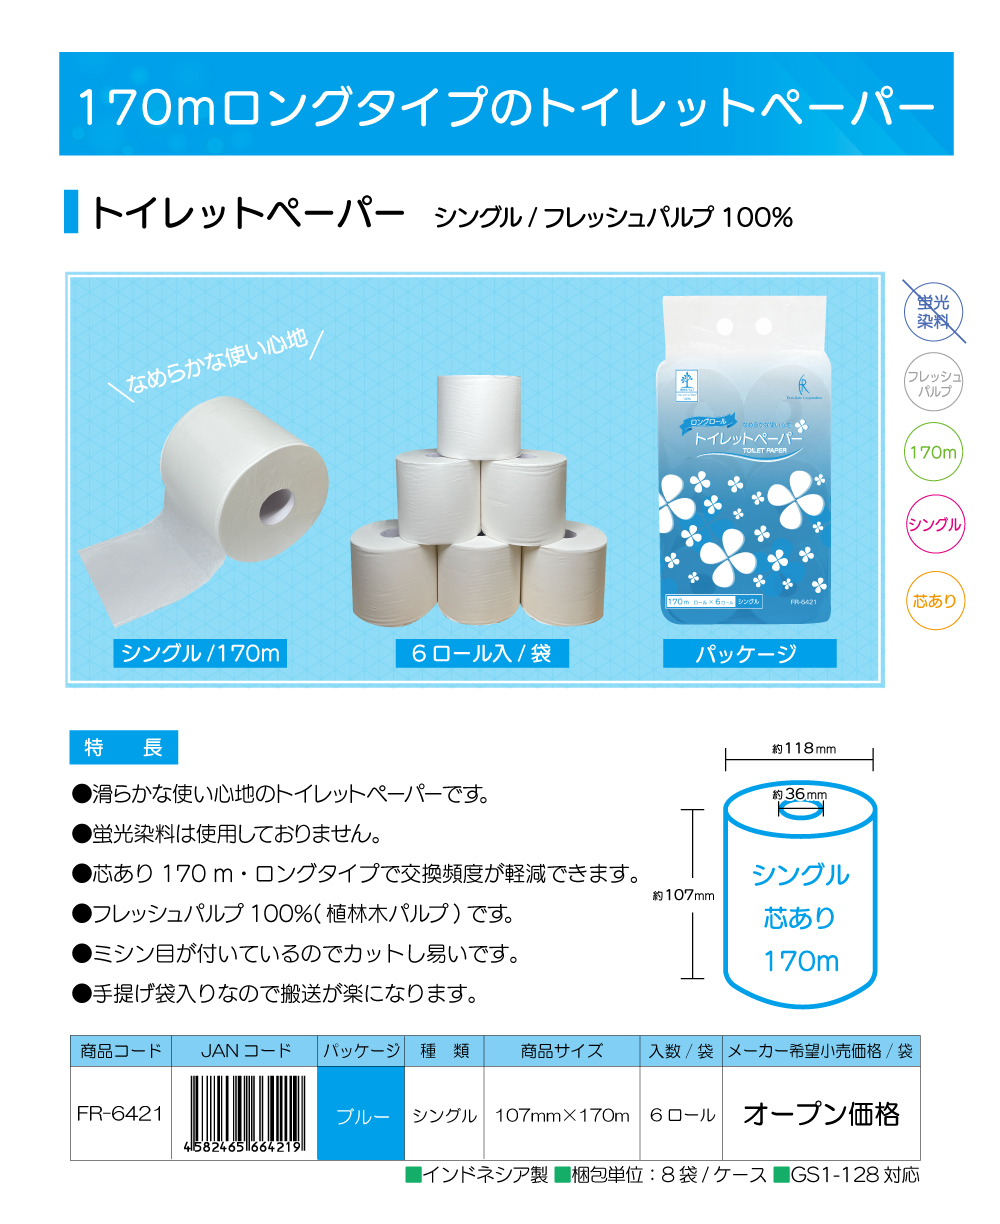 <strong>■トイレットペーパー 発売開始</strong>